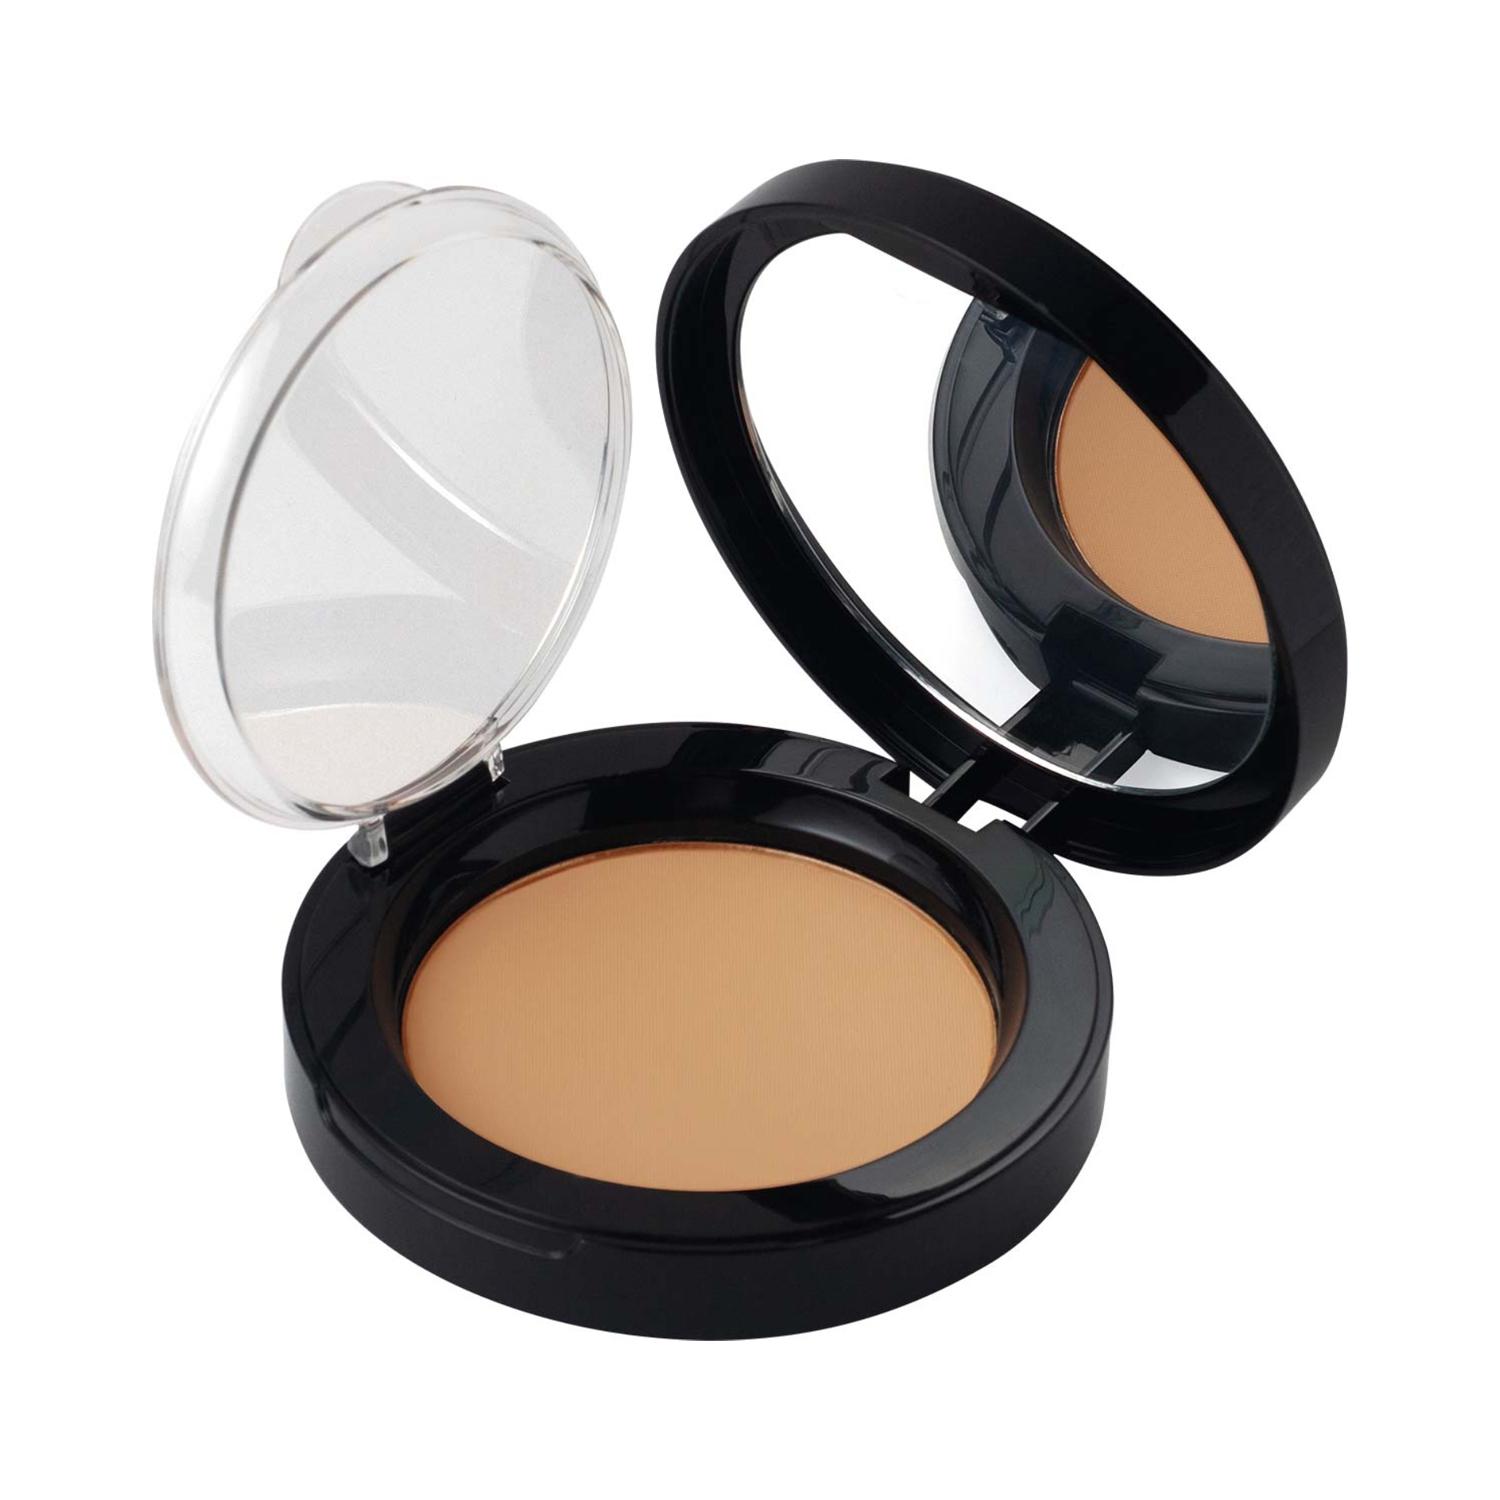 pac-take-cover-compact-powder---16-coppermint-(7.85g)